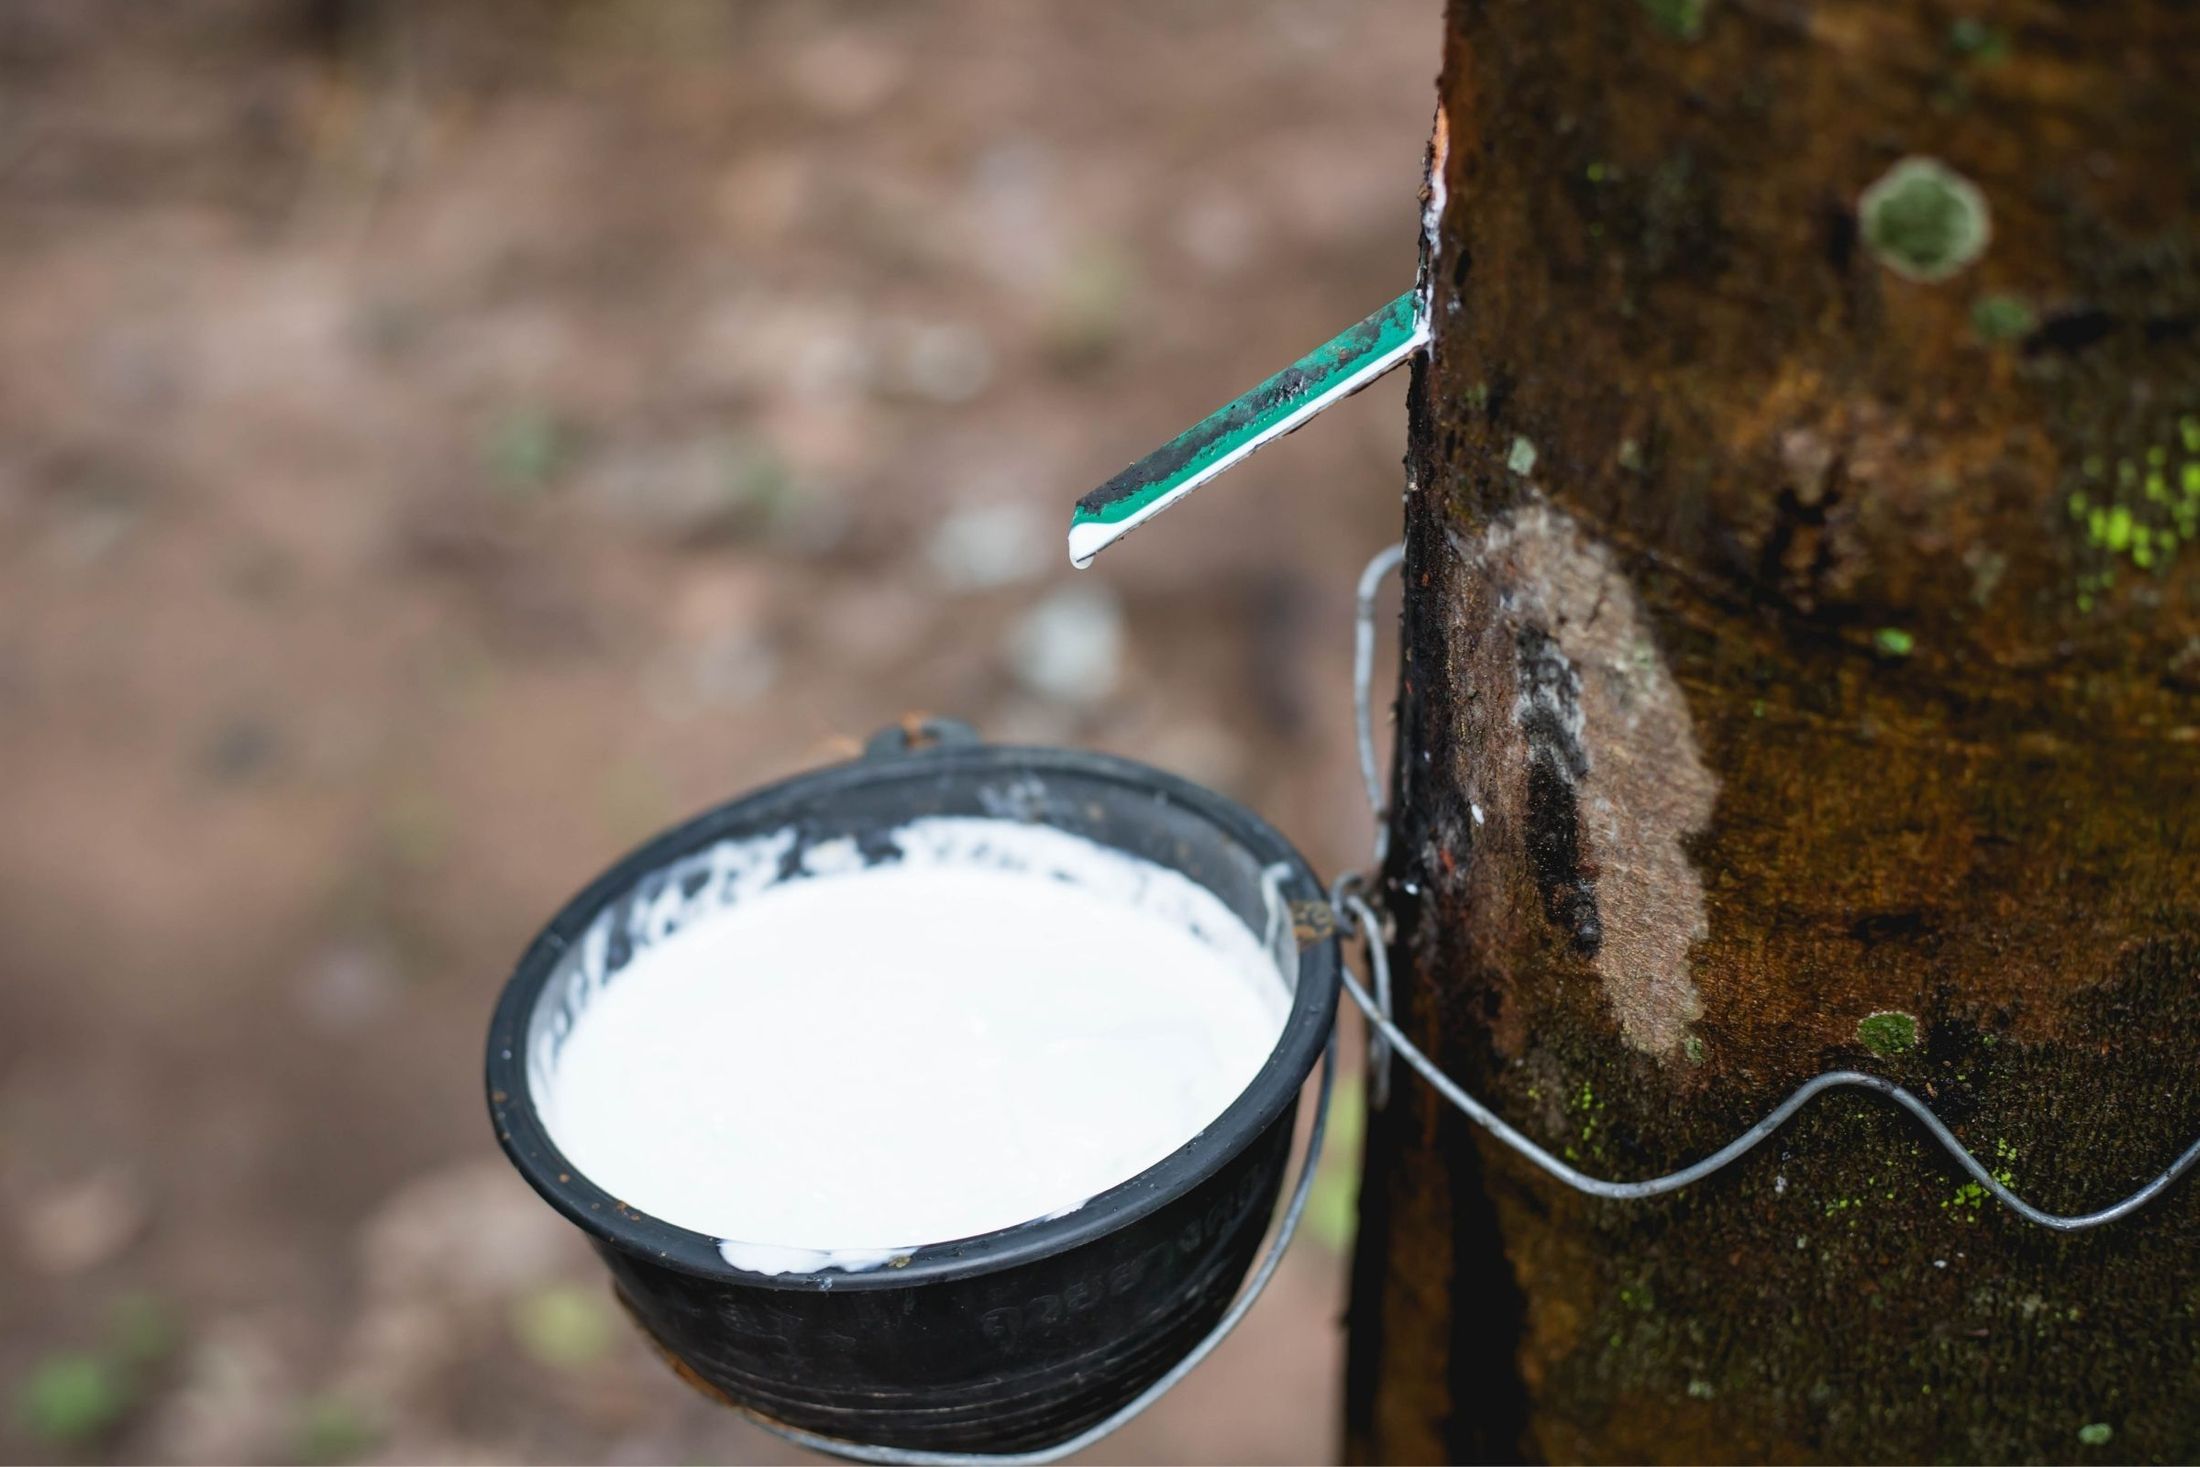 Natural Rubber and Its Use as Eco Rubber Flooring: An Origin Story